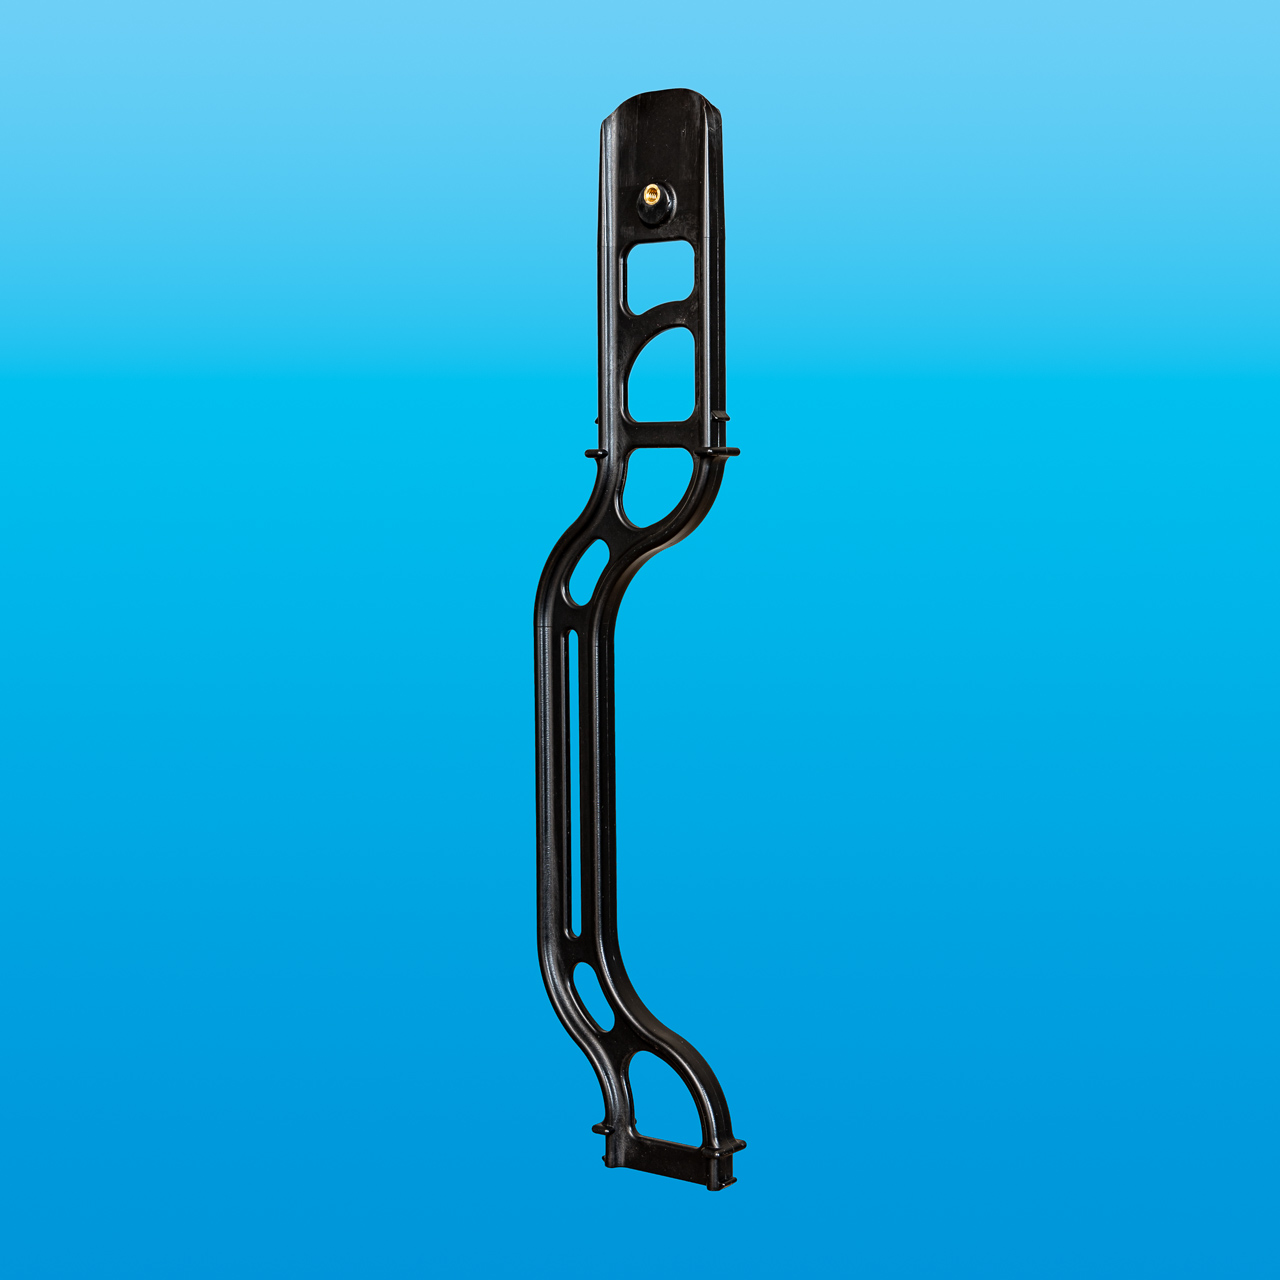 Plastic Injection Molded Nylon Arrow Quiver Spine for the Sporting Goods Industry